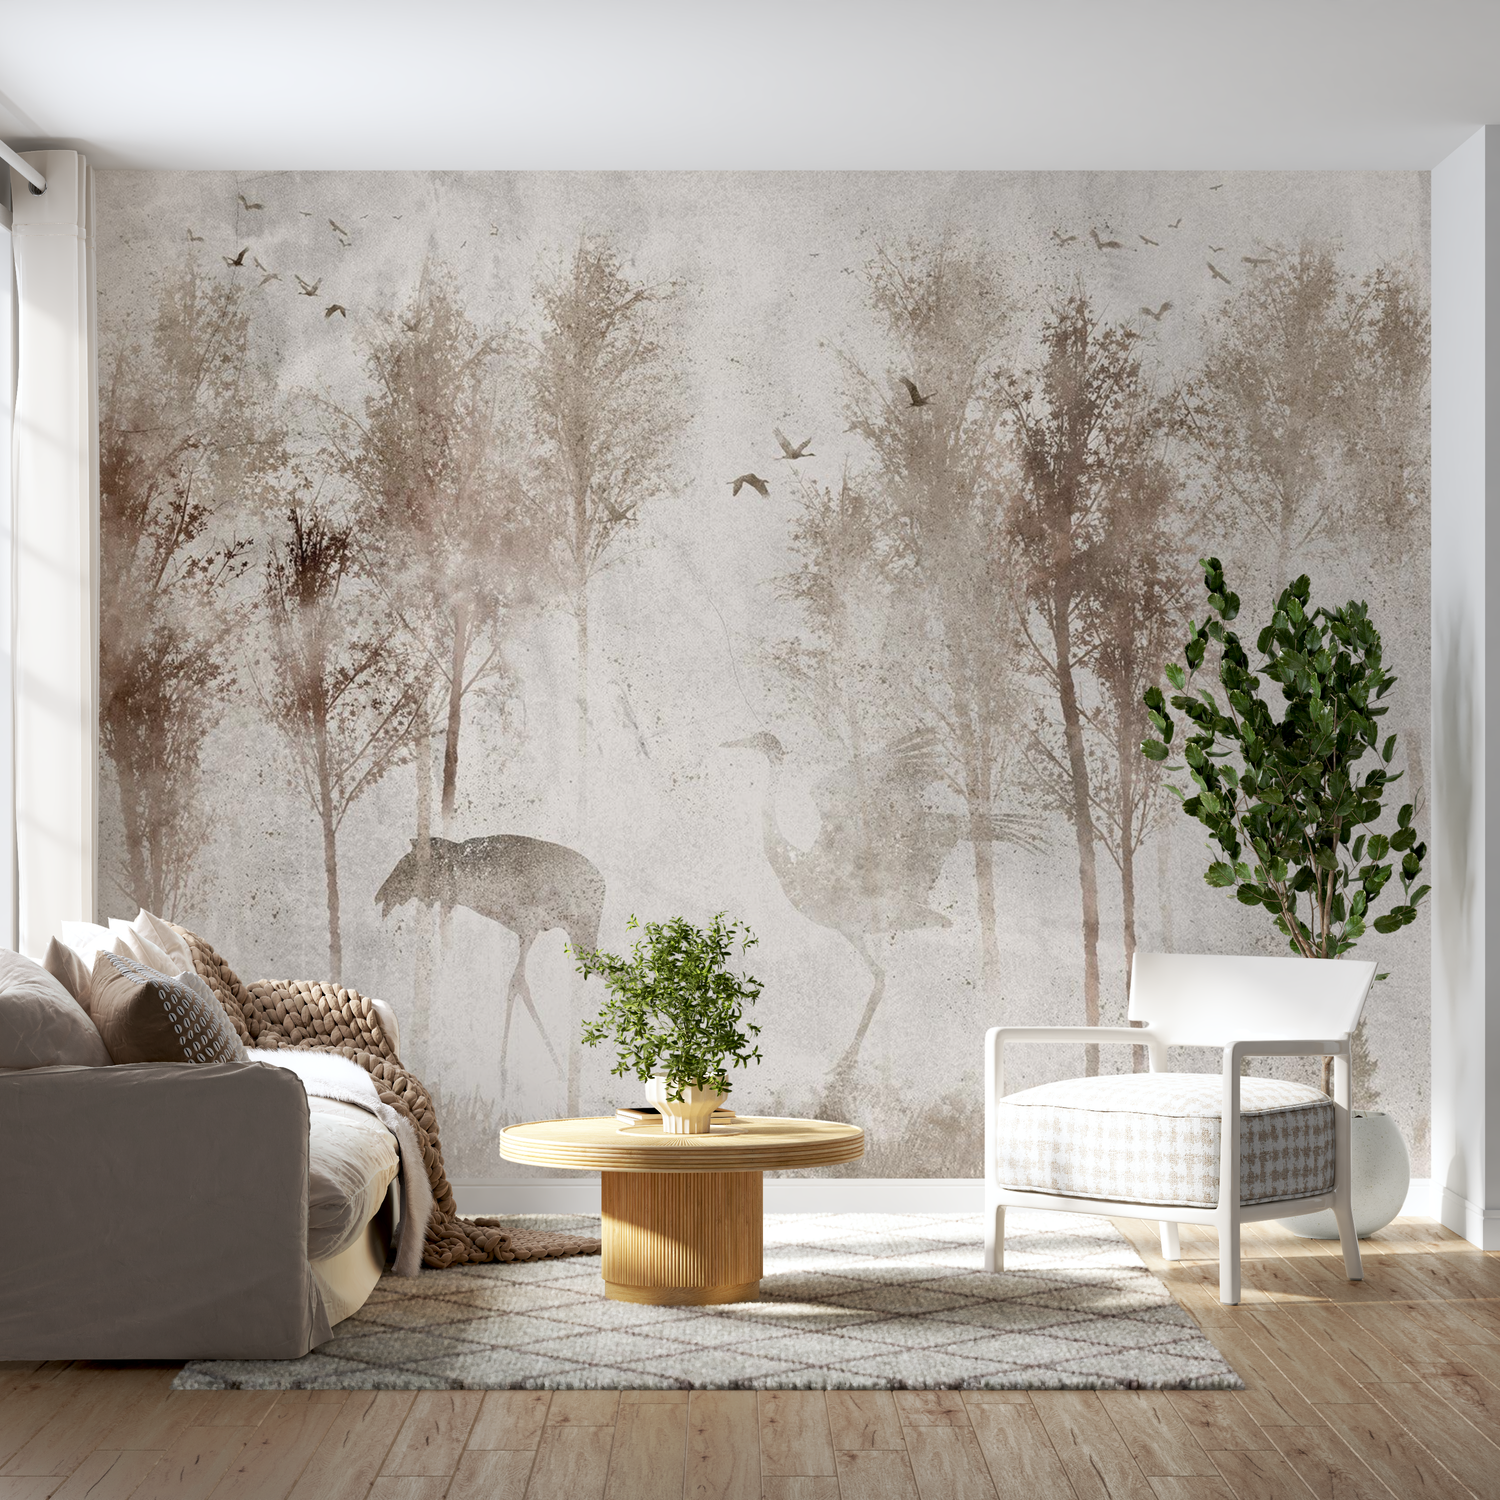 Peel & Stick Landscape Wall Mural - Birds In Foggy Forest - Removable Wallpaper 38"Wx27"H